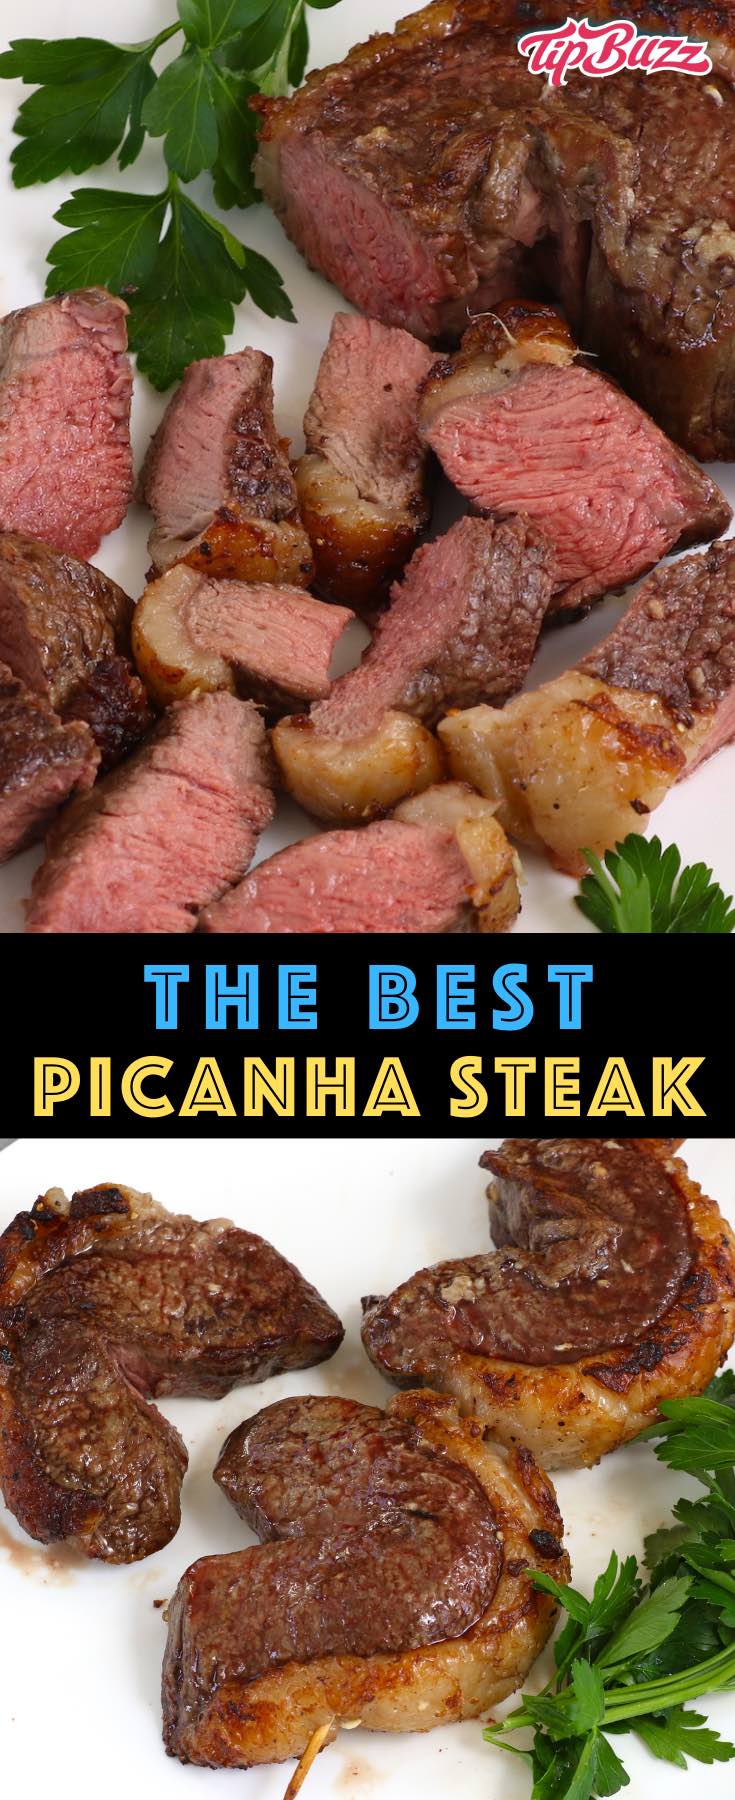 Picanha is traditional Brazilian barbecue at its best. Learn how to make a tender and juicy picanha steak at home using the grill or oven. So delicious and so easy! #picanha